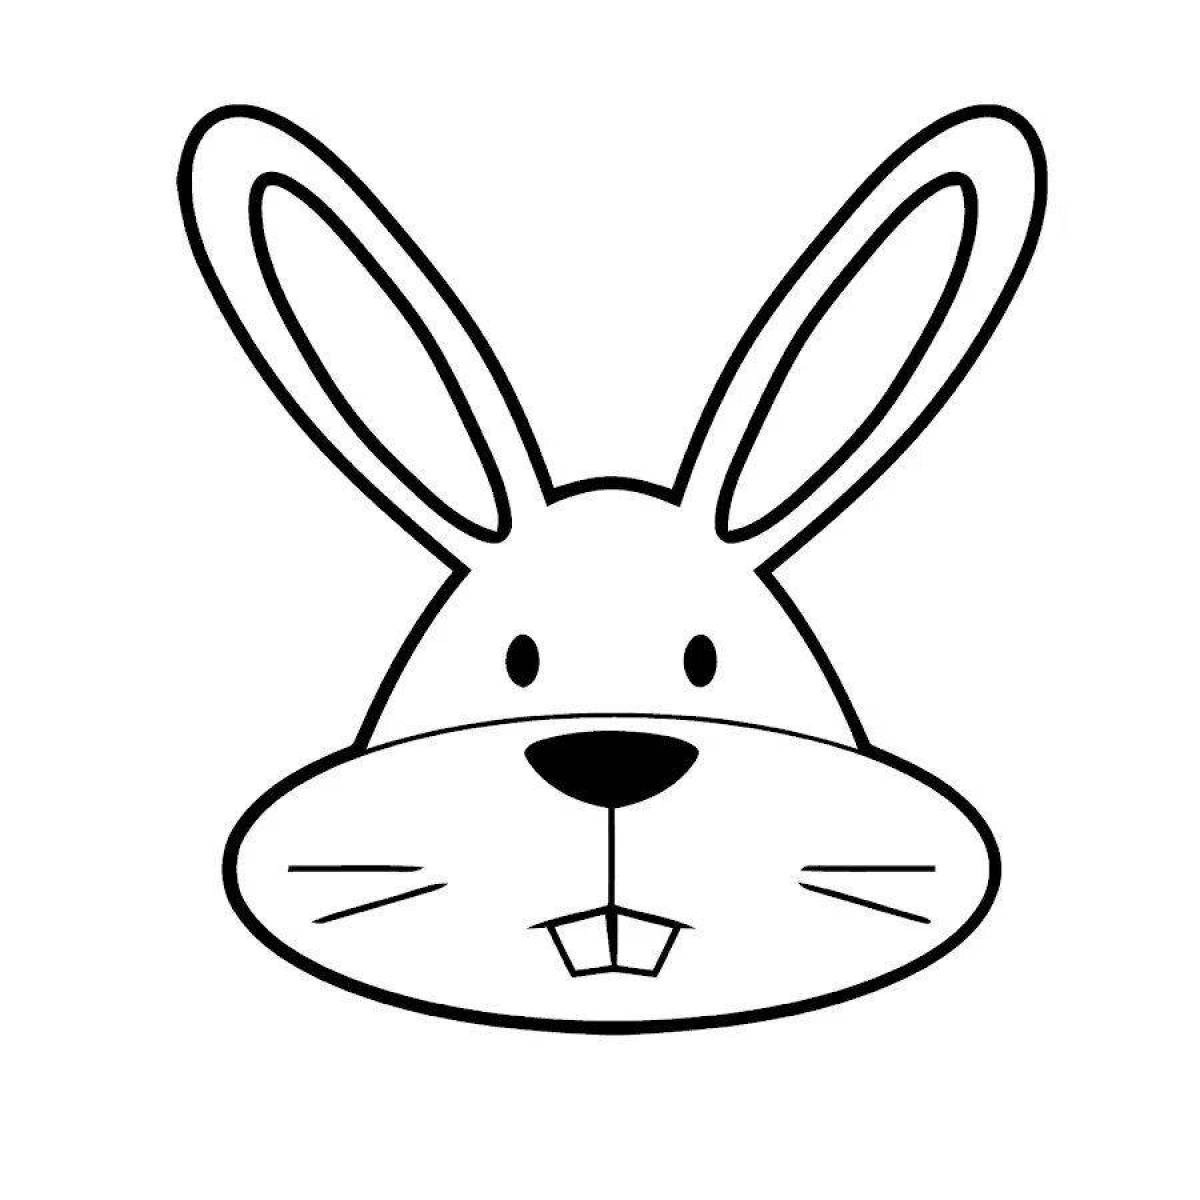 Winking rabbit coloring page